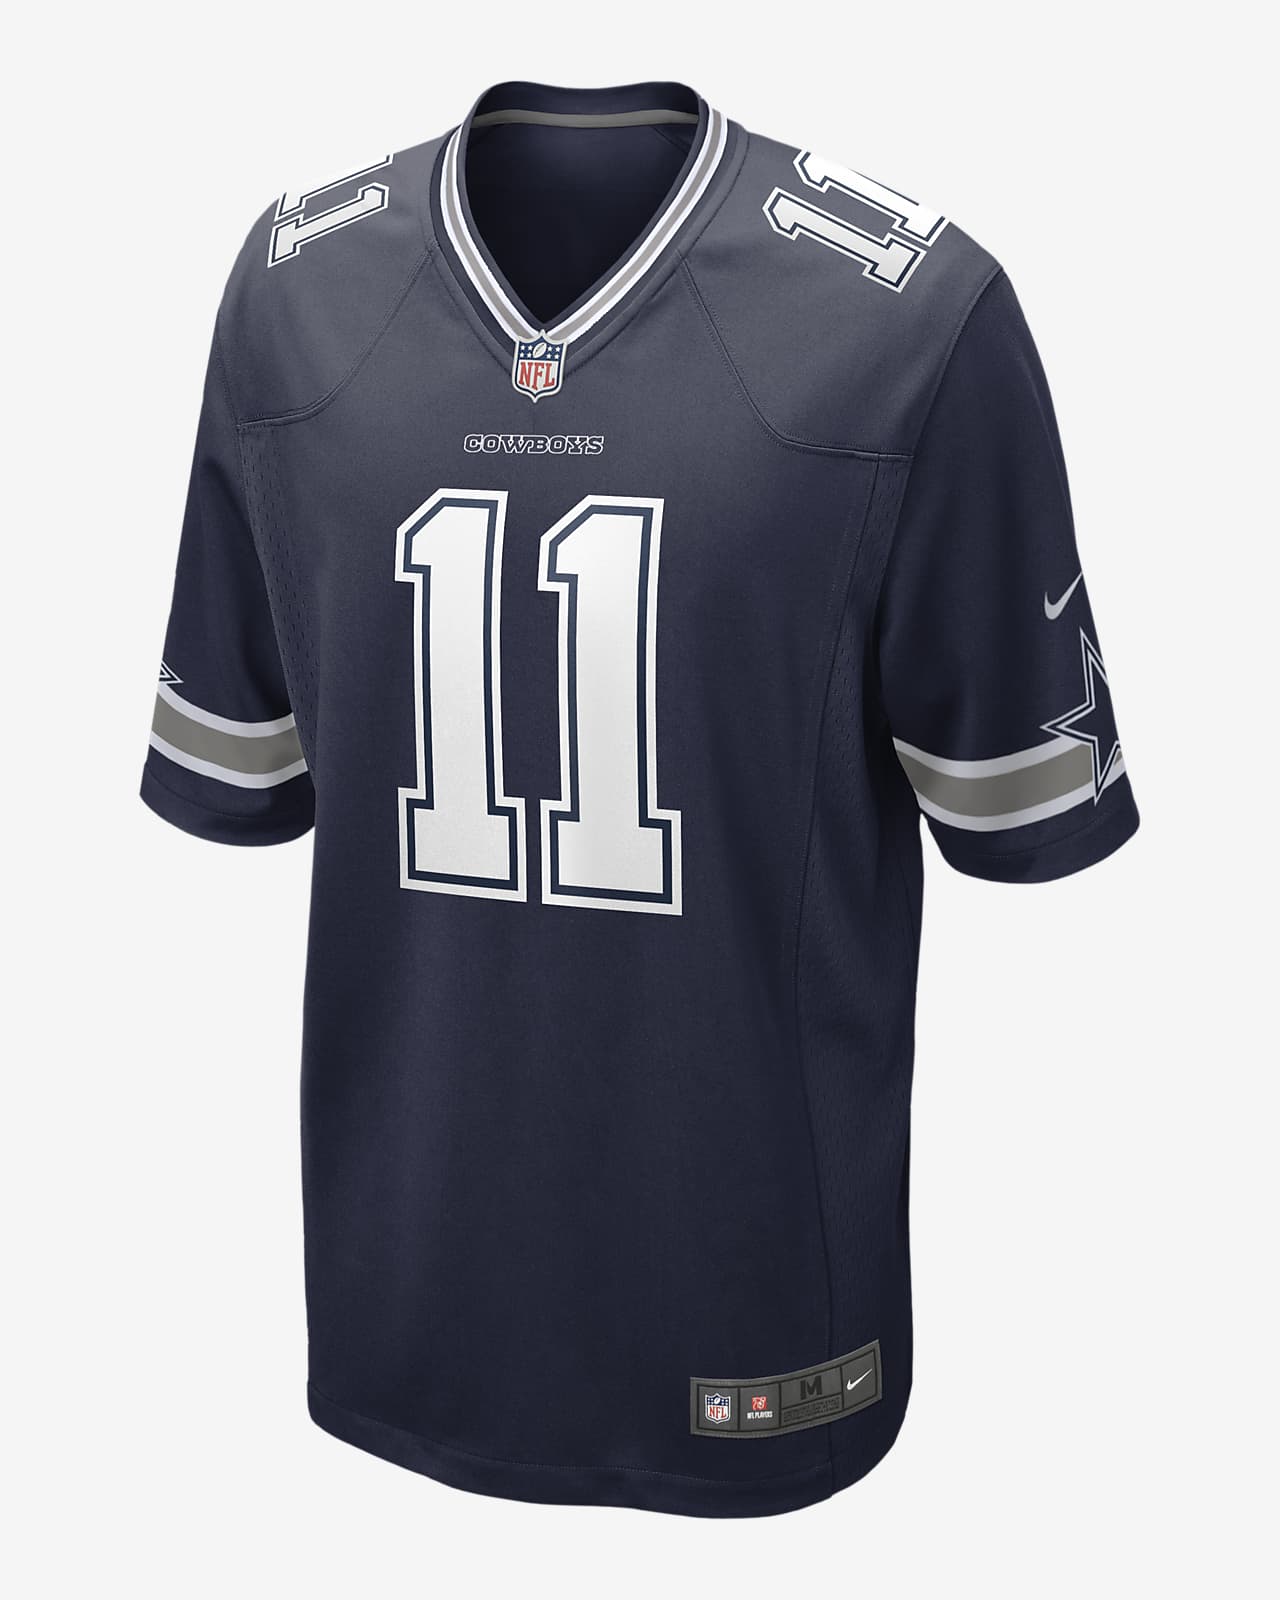 where can i buy a cowboys jersey